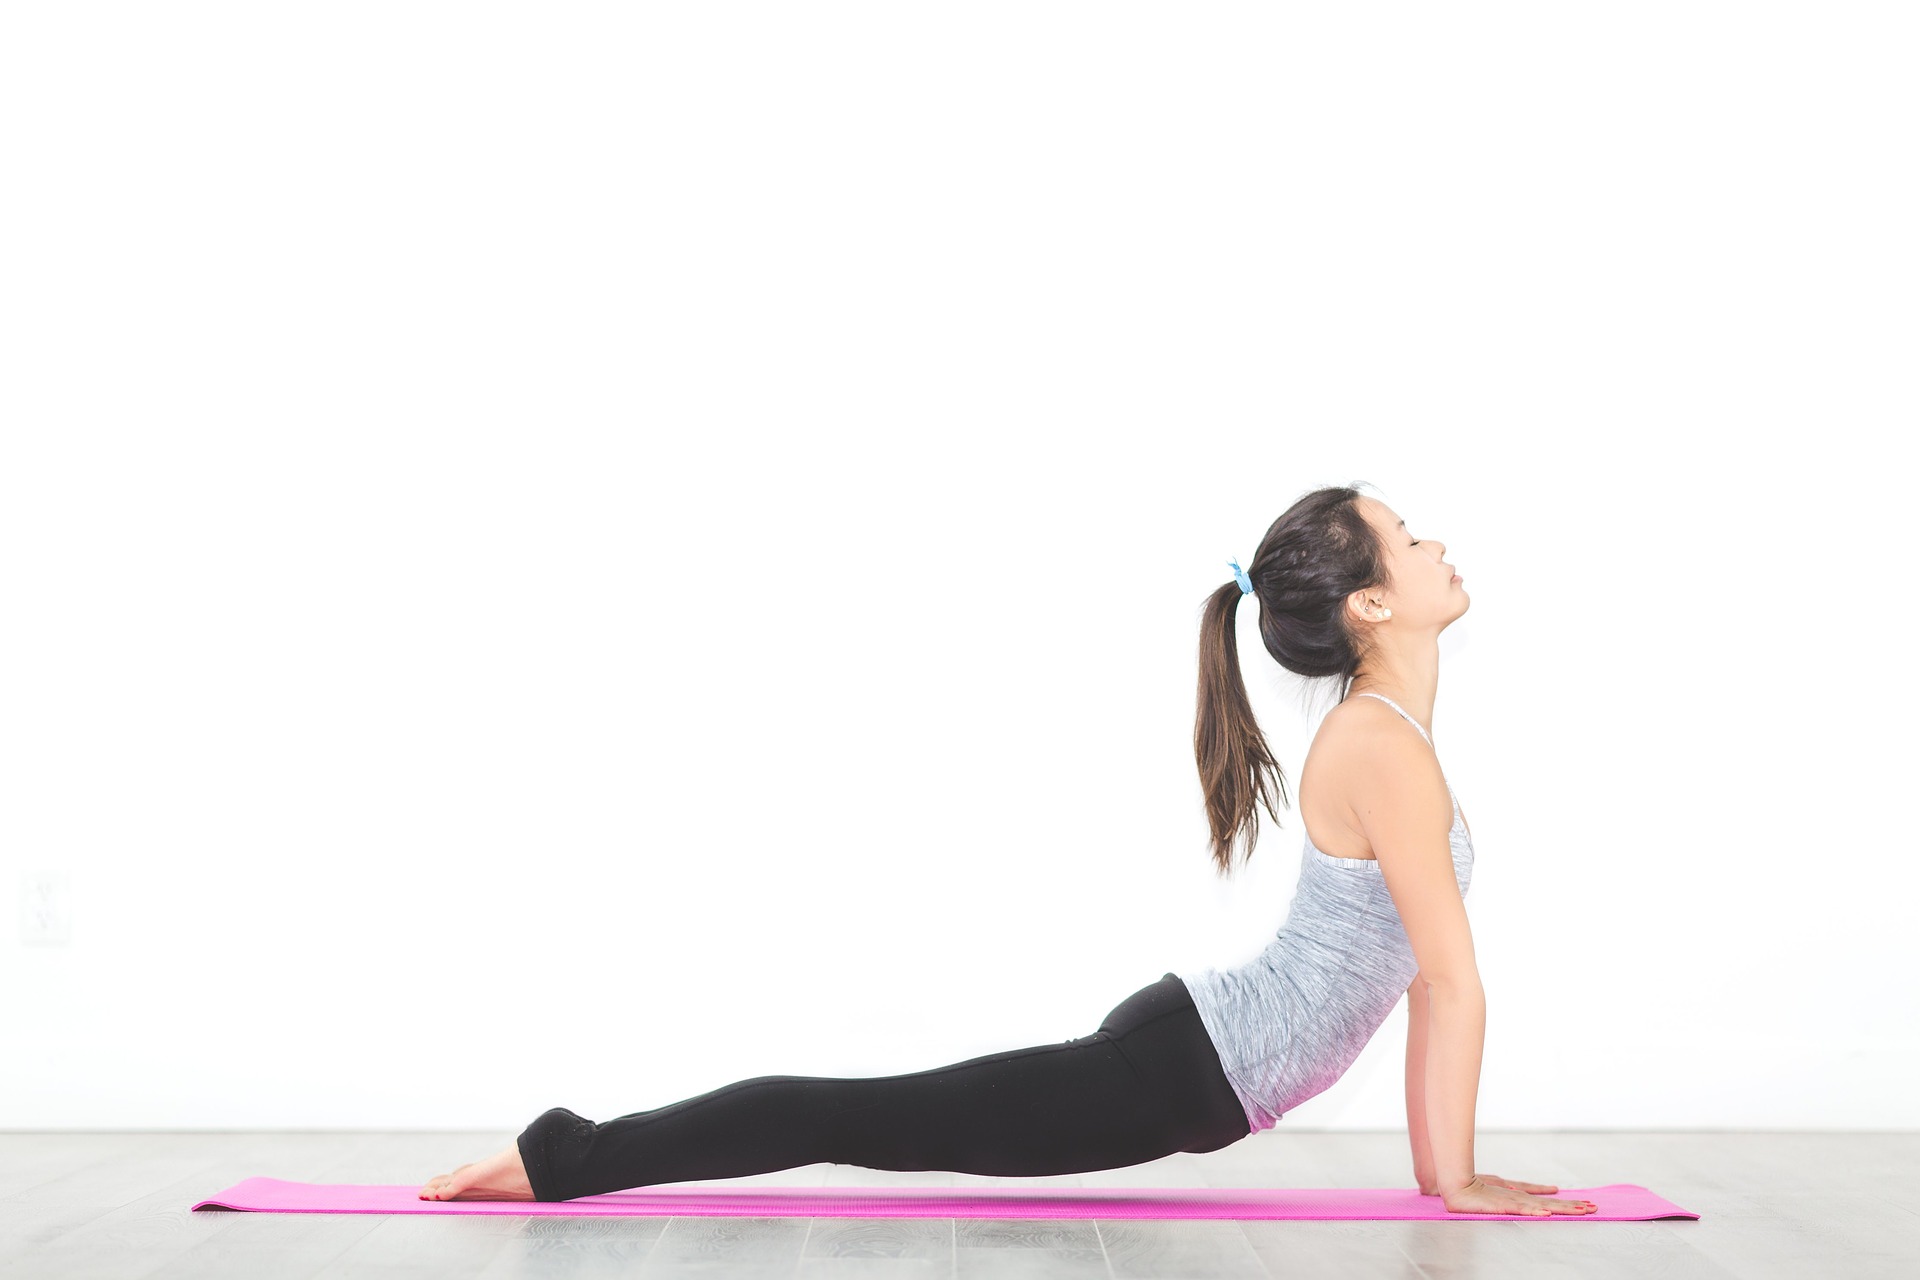 Heart Opening Poses - Best Yoga Poses For Your Heart & Chest